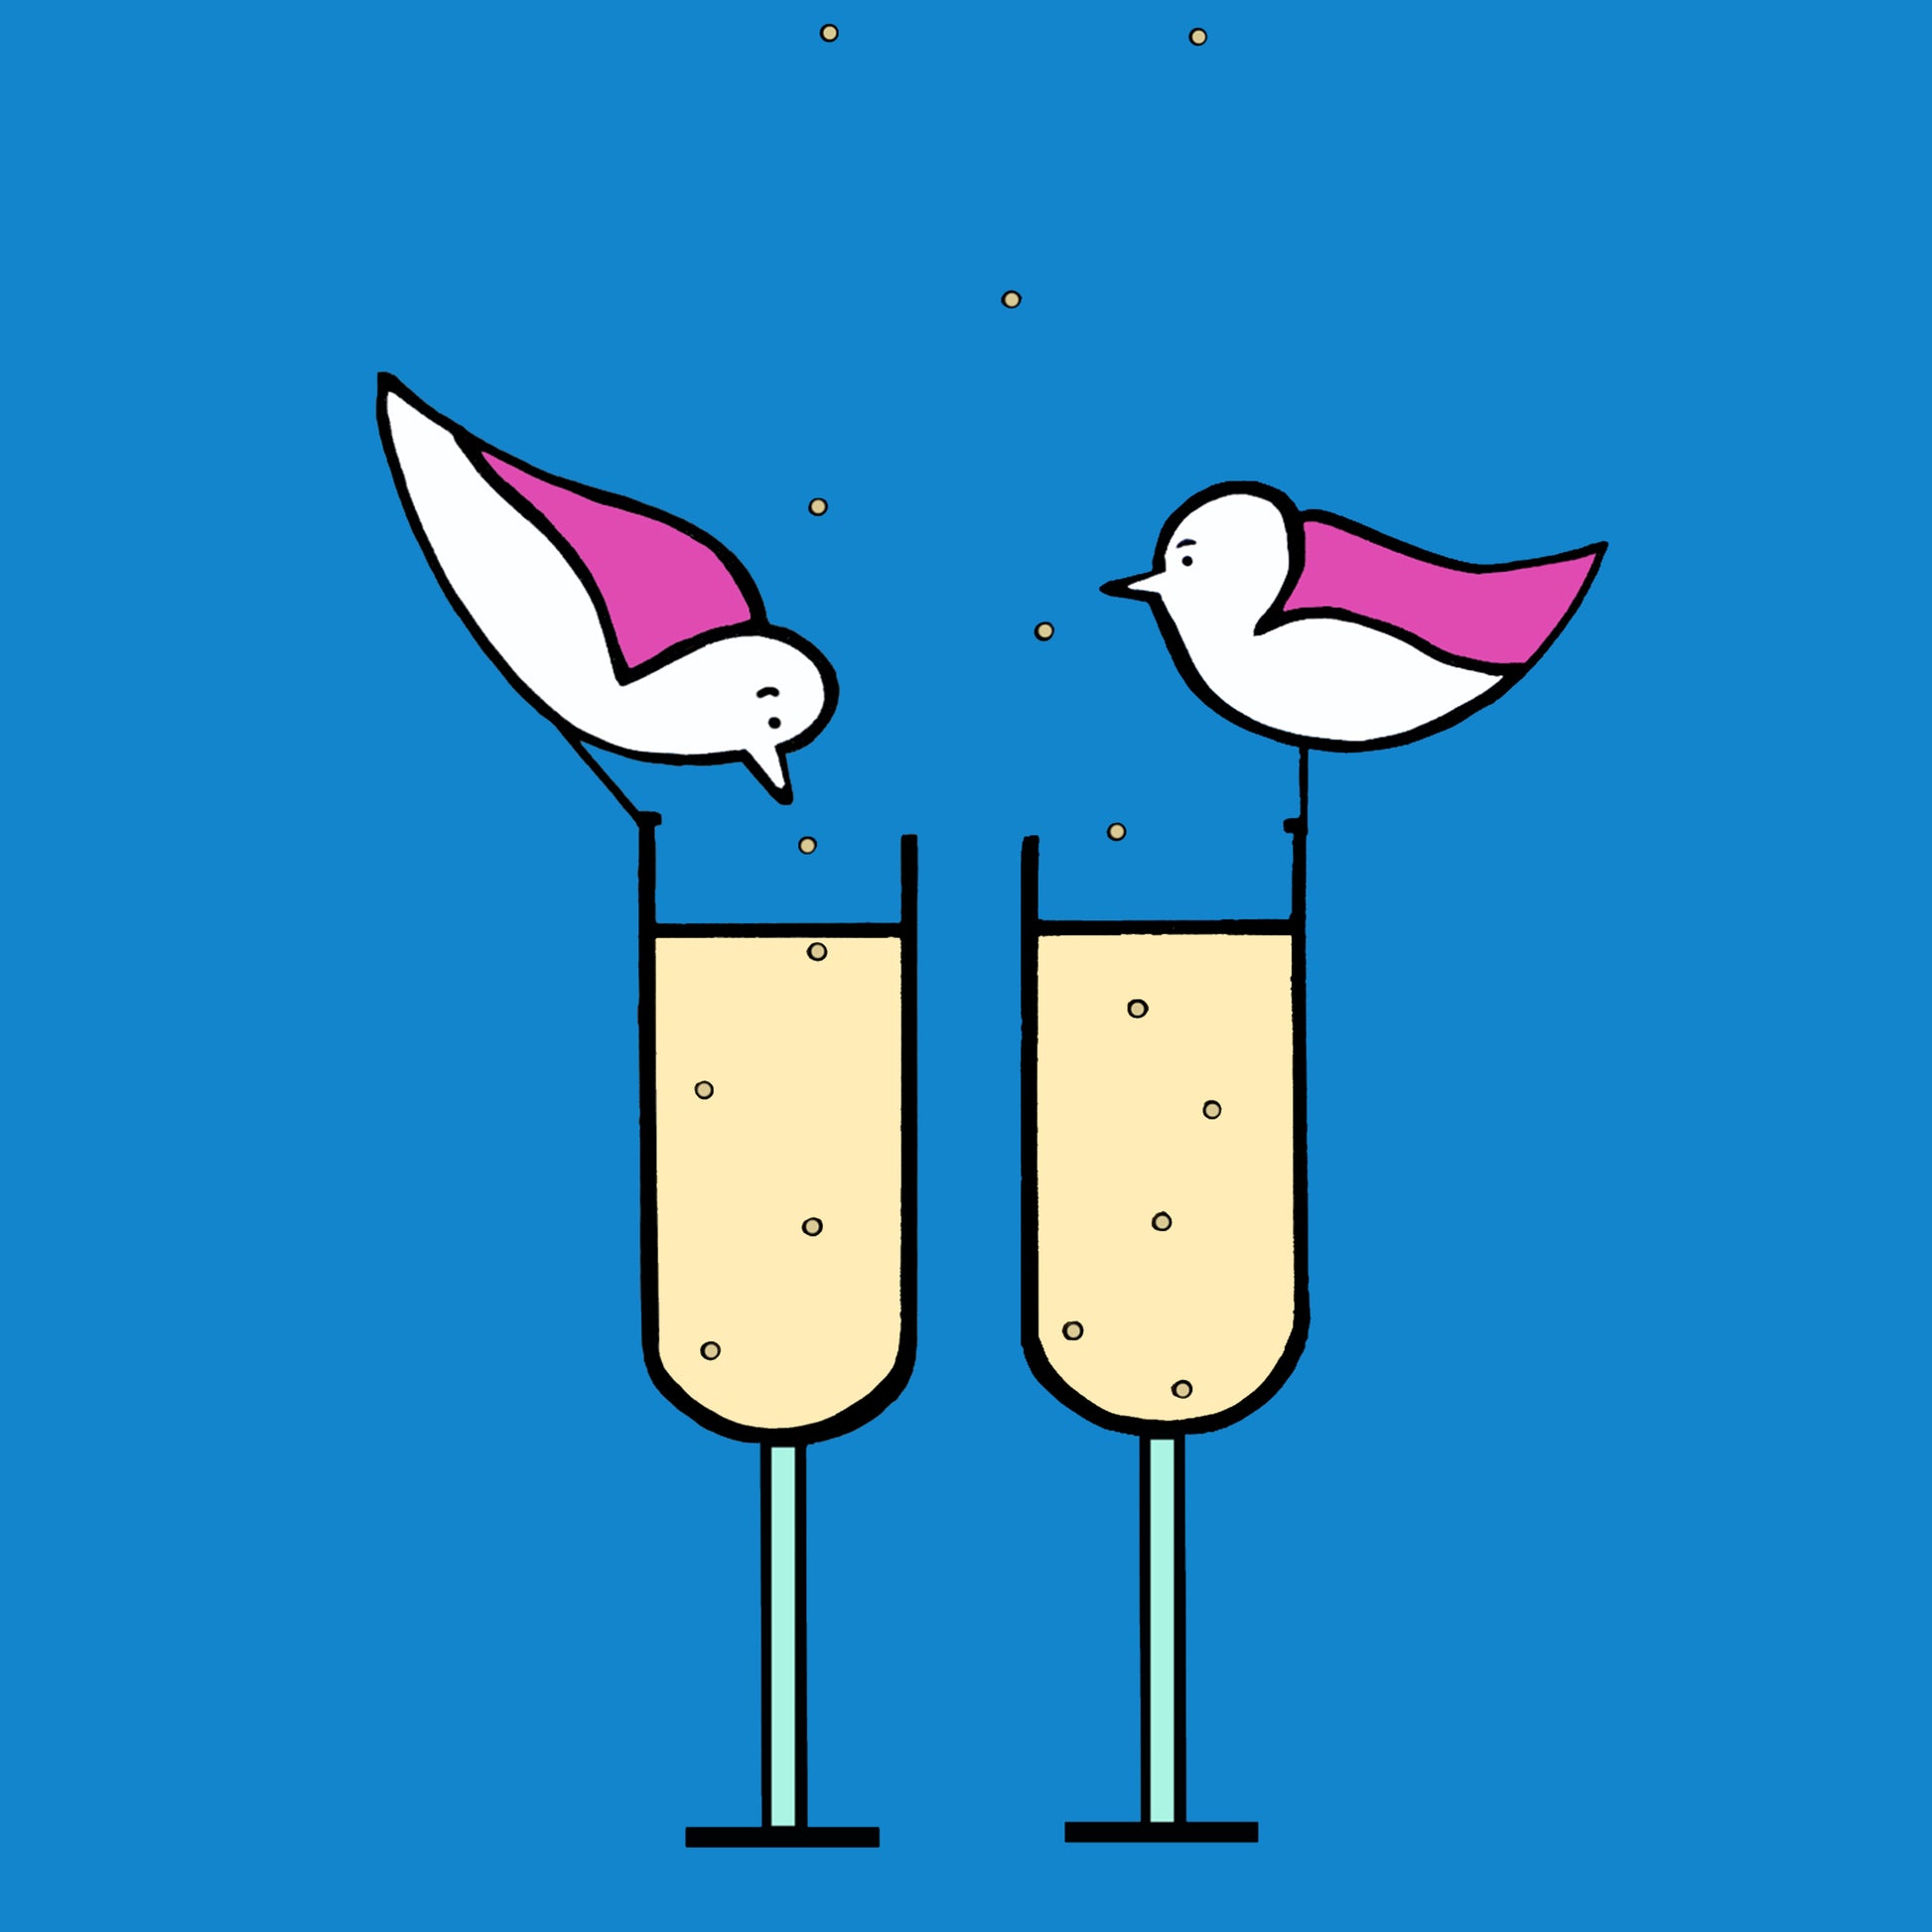 Two pink winged seagulls are perched on the rim of two glasses of fizz, the bubbles are floating from the bottom of the glass out to the top. The background is bright blue. One seagull is peering into the glass.